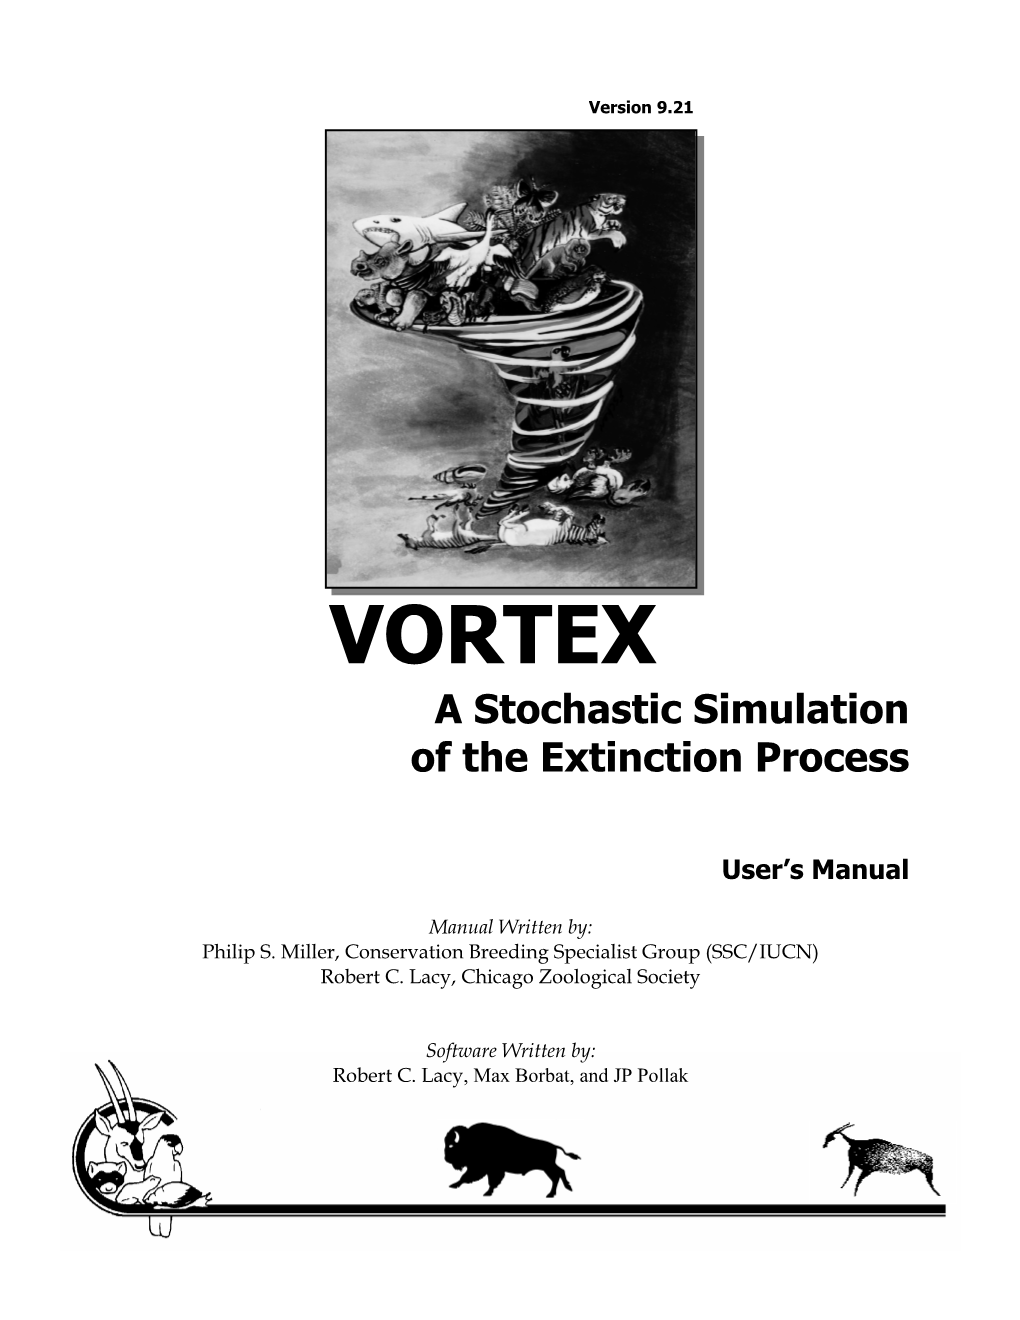 VORTEX a Stochastic Simulation of the Extinction Process